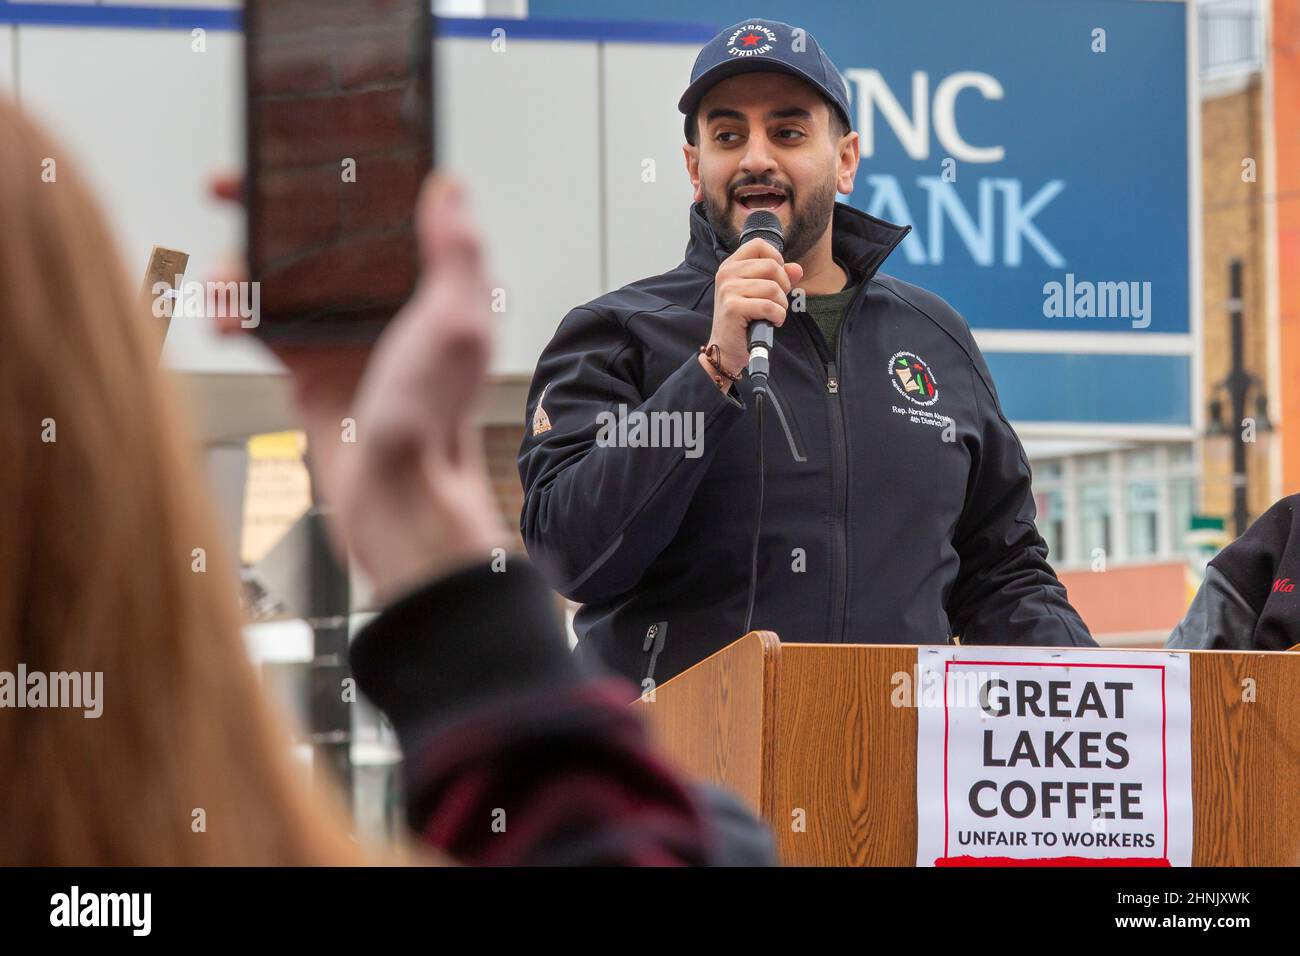 Detroit, Michigan - Michigan State Representative Abraham Aiyash speaks at a rally supporting striking workers at a Great Lakes Coffee shop. Aiyash is Stock Photo